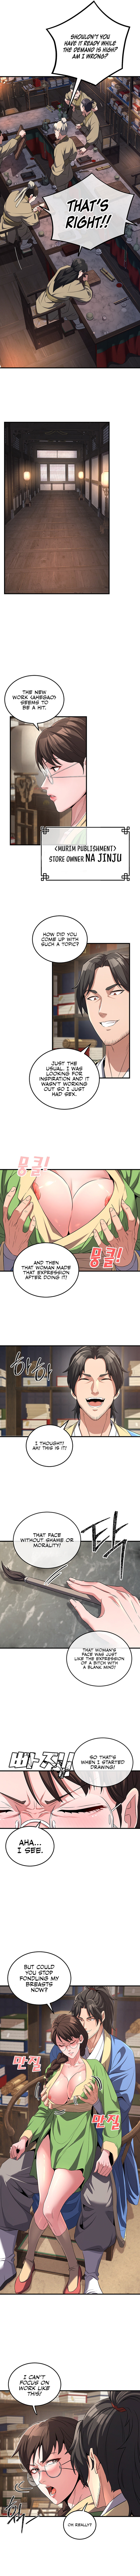 The Lustful Demon is the King of Demons - Chapter 2 Page 4